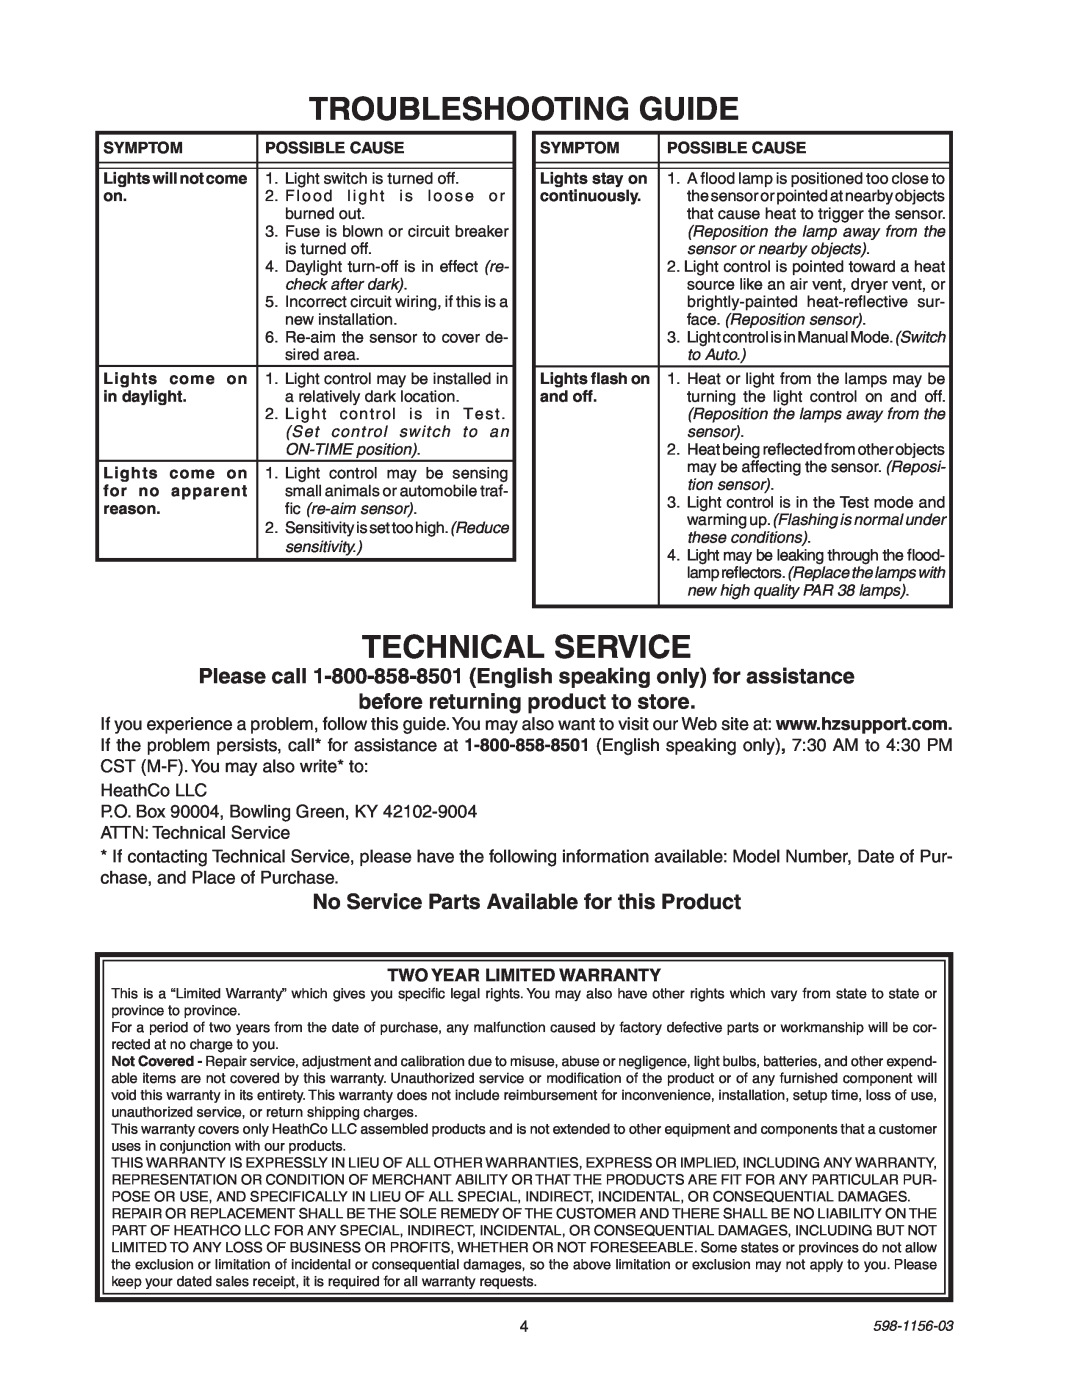 Heath Zenith SH-5408 manual Troubleshooting Guide, Technical Service, before returning product to store 